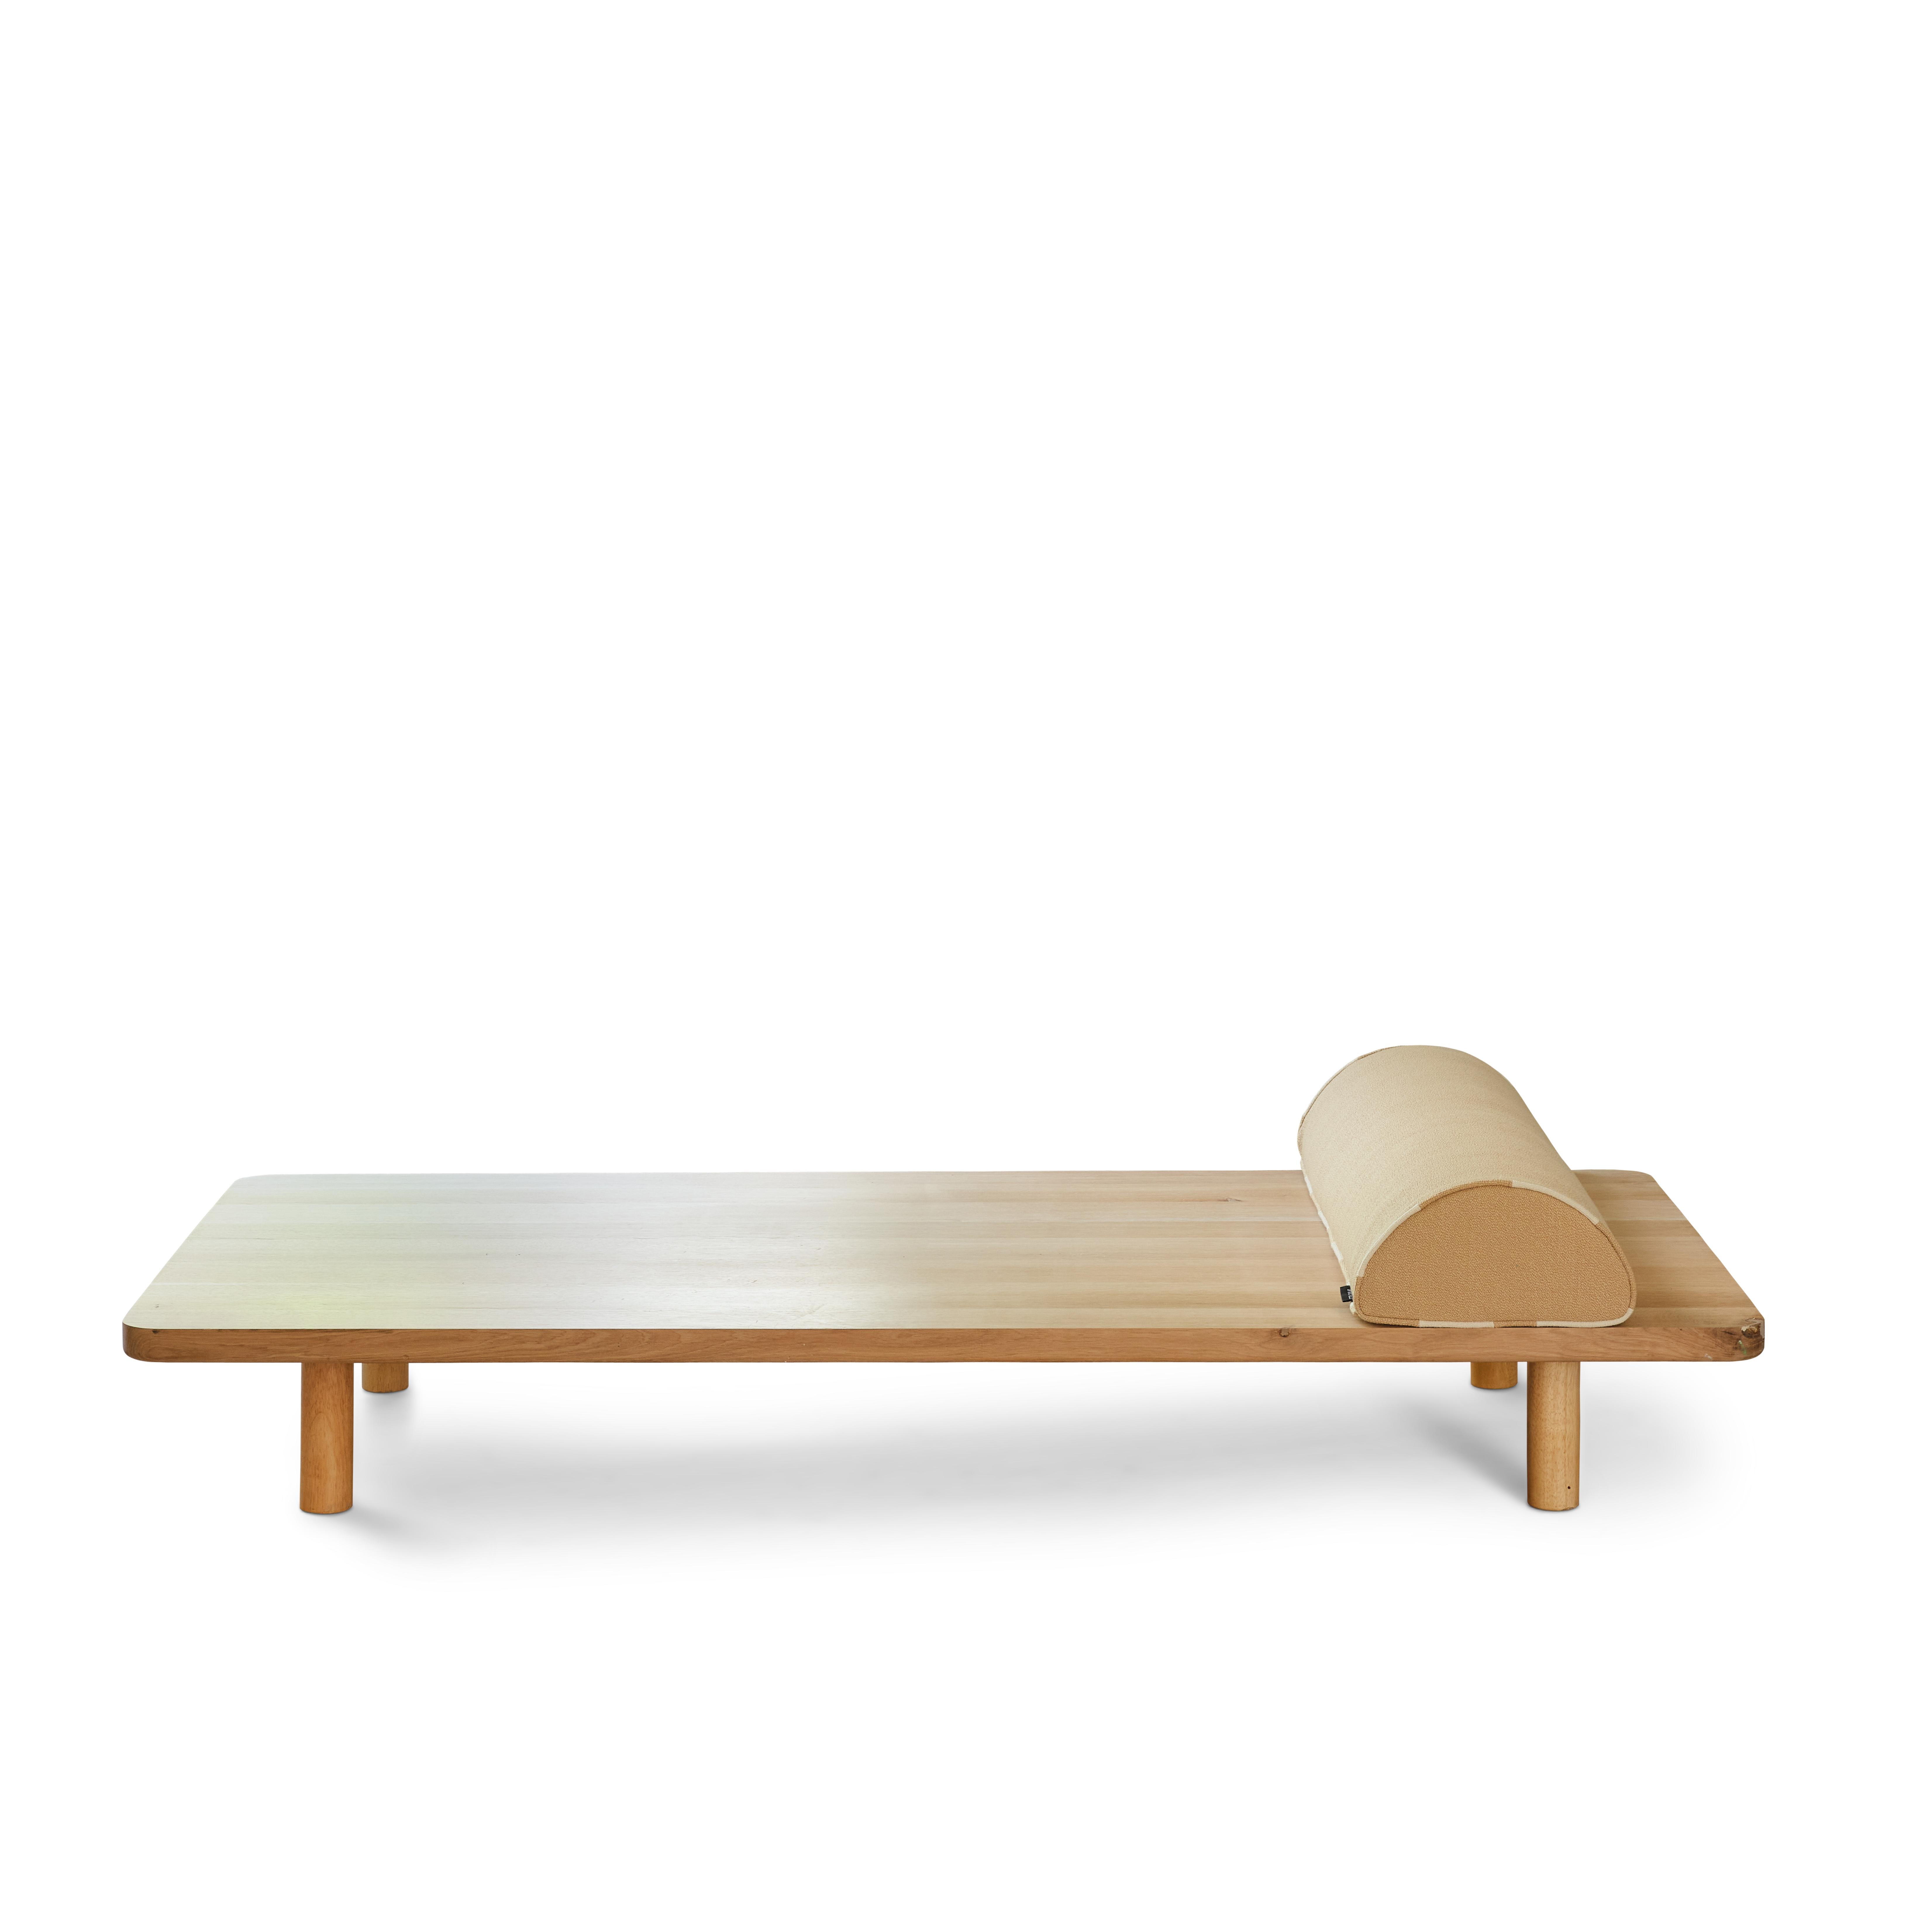 Needlework Solid Oak Day Bed, Modern Textile Matress and Bolster Cushions For Sale